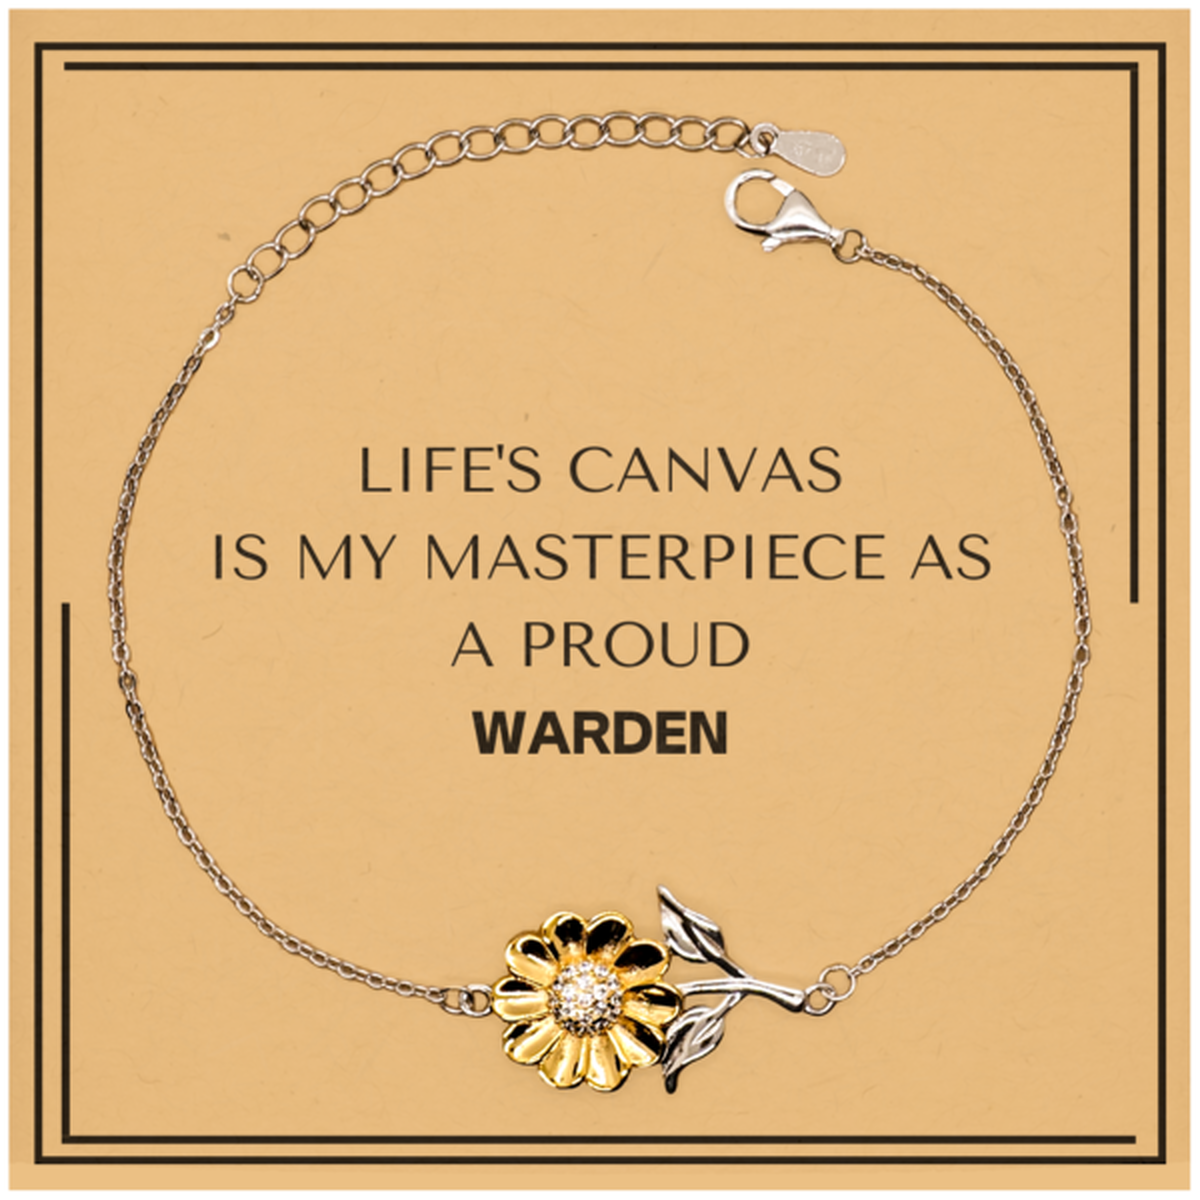 Proud Warden Gifts, Life's canvas is my masterpiece, Epic Birthday Christmas Unique Sunflower Bracelet For Warden, Coworkers, Men, Women, Friends